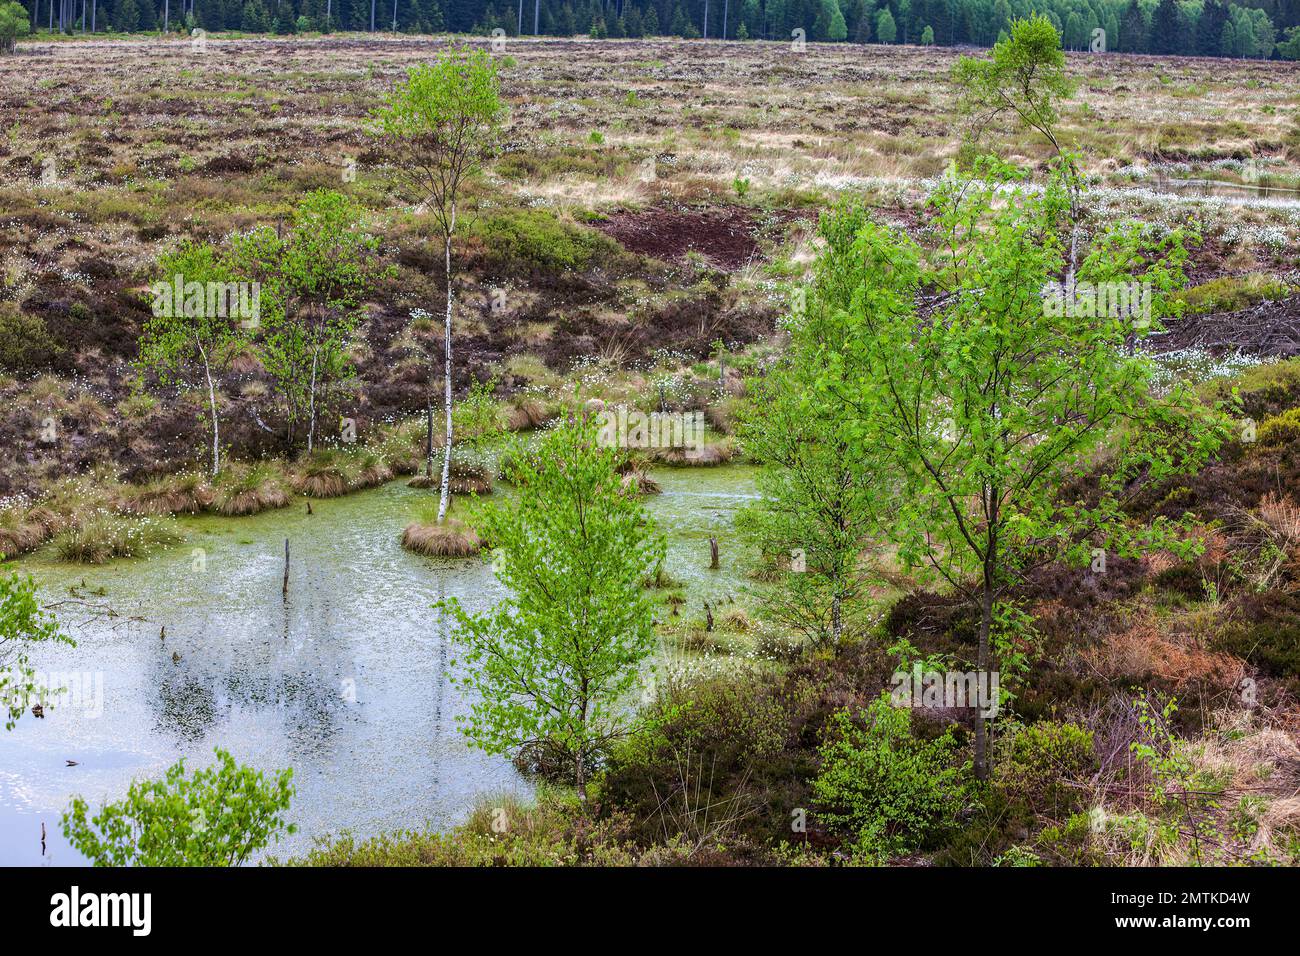 The raised bog Mecklenbruch, Silberborn, Holzminden district, Solling, Lower Saxony, Germany Stock Photo